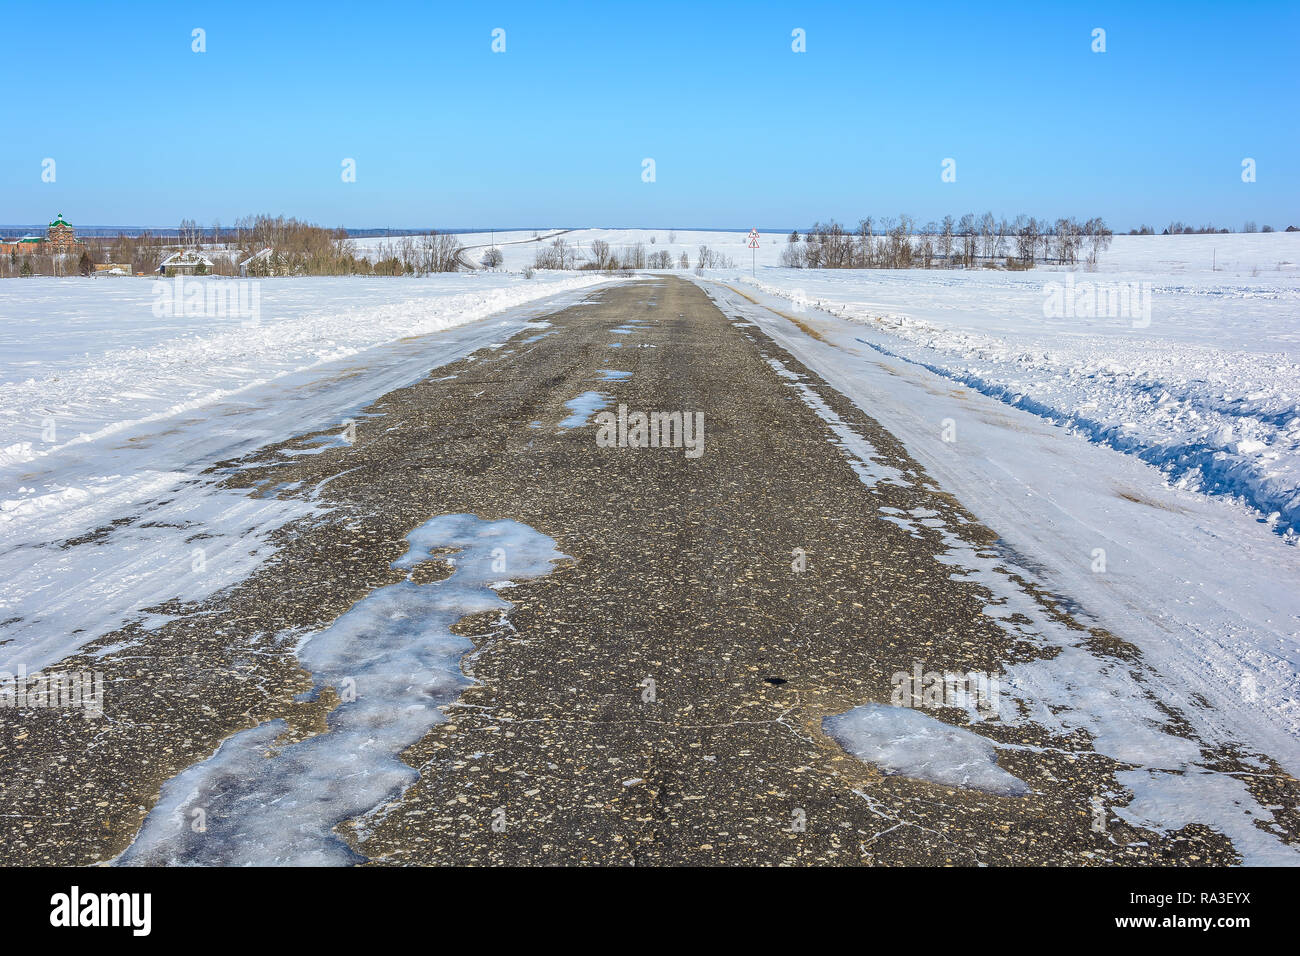 Ice road in cold winter weather Stock Photo